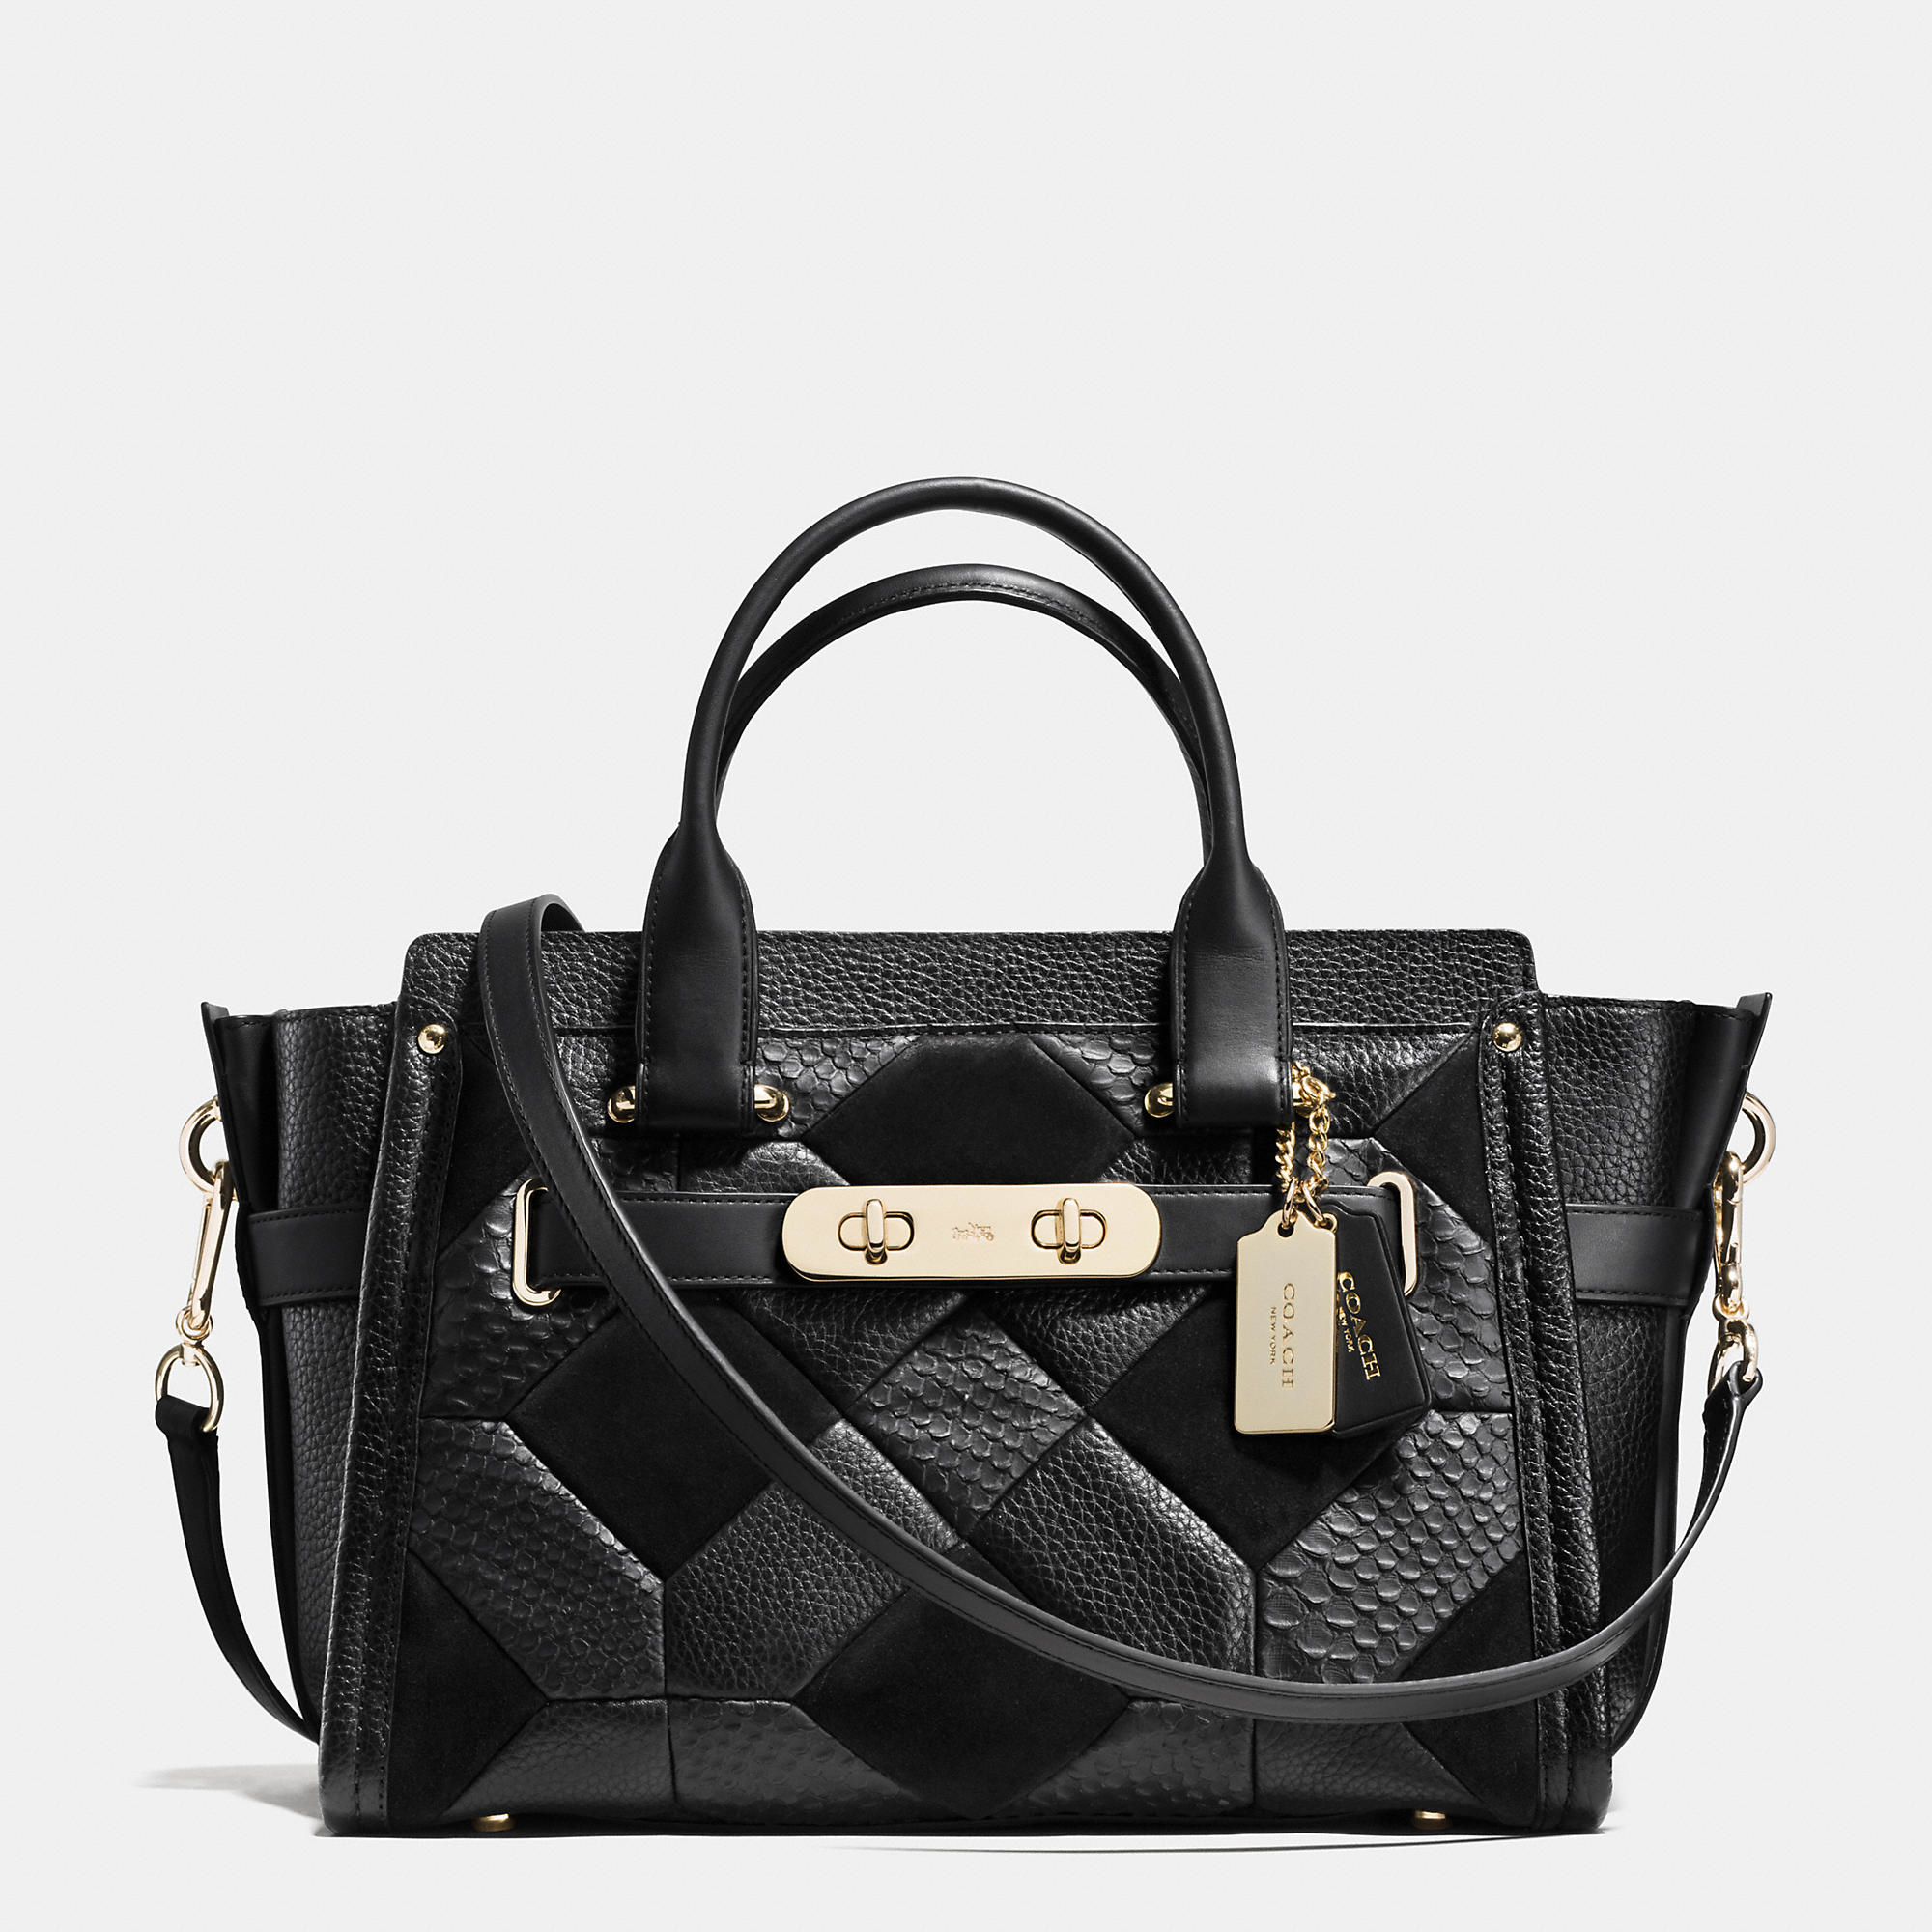 COACH Swagger 27 In Pebble Leather in Light Gold/Black (Black) - Lyst